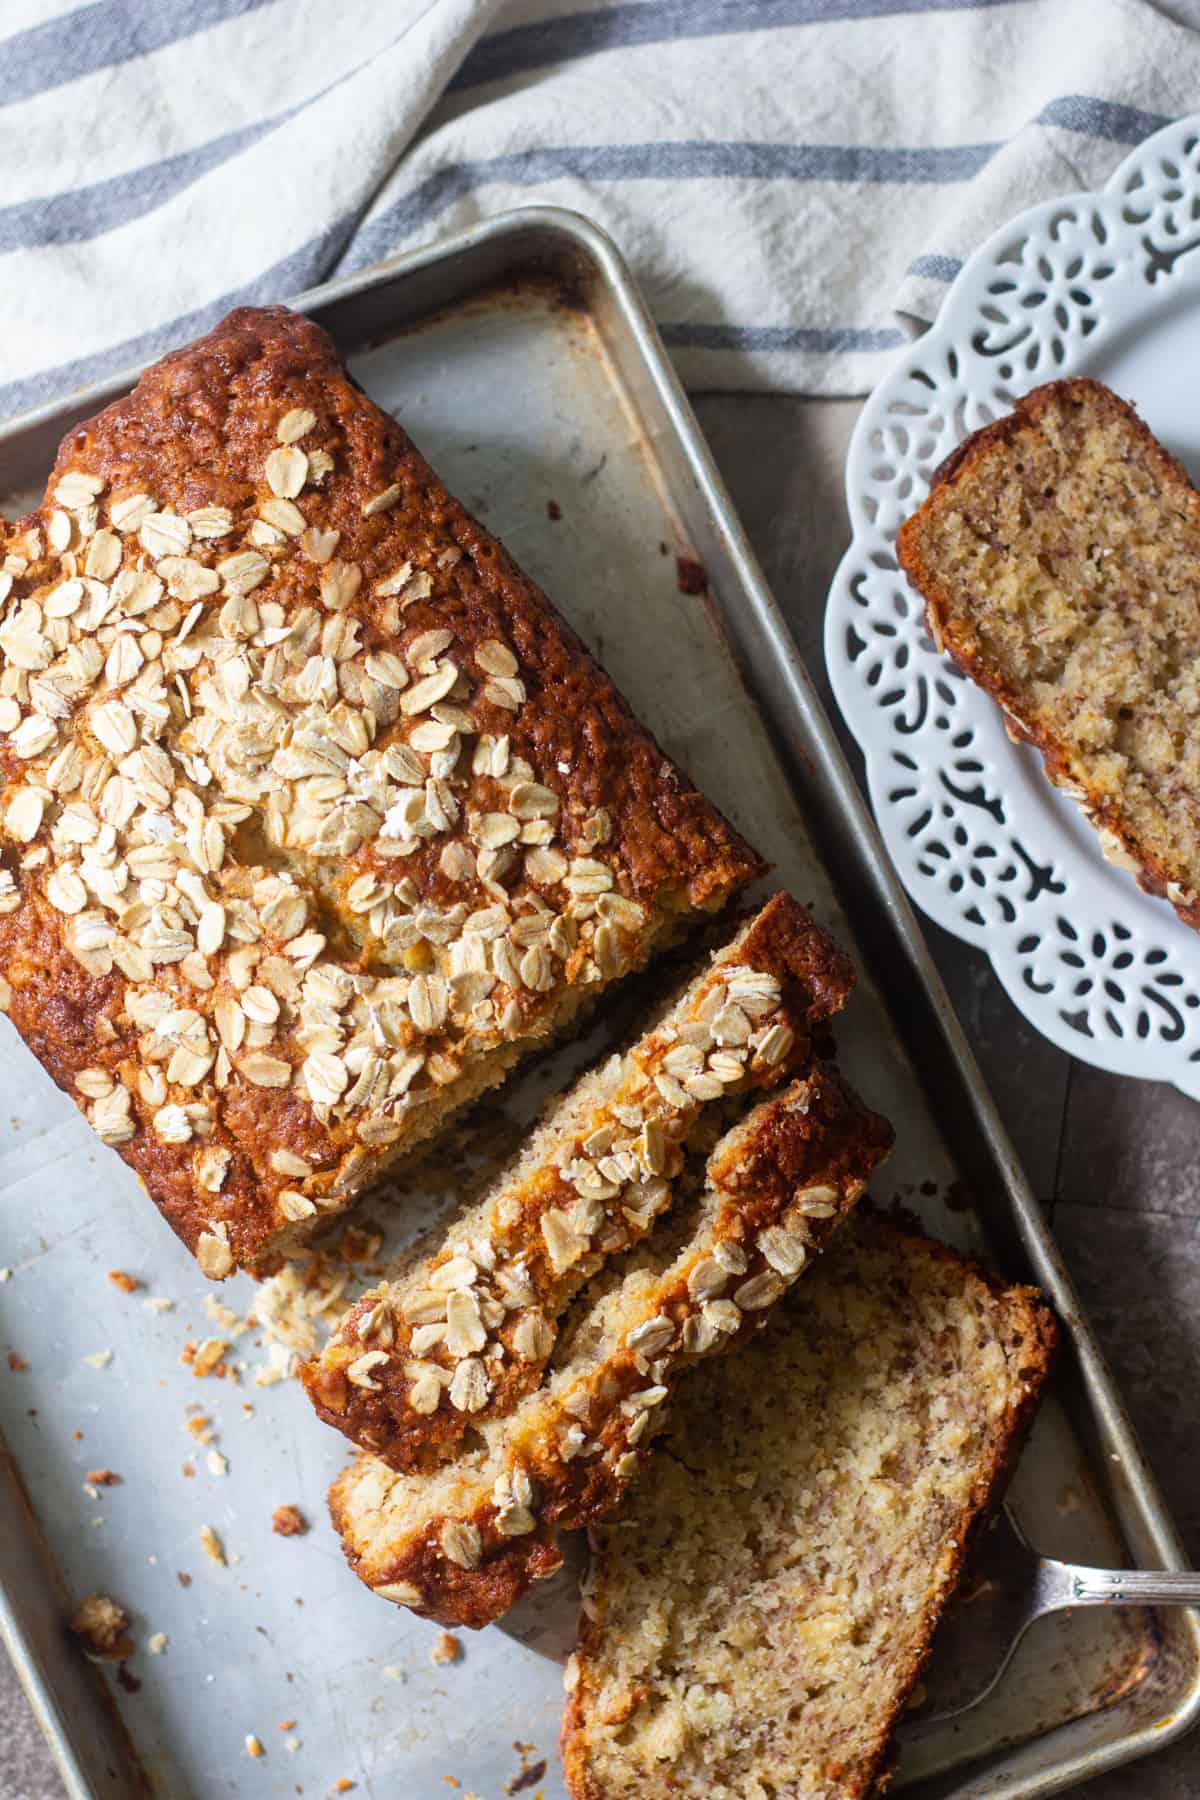 Oatmeal banana bread is perfect for breakfast. This easy banana bread very simple and light, coming together in no time and everyone loves it. 